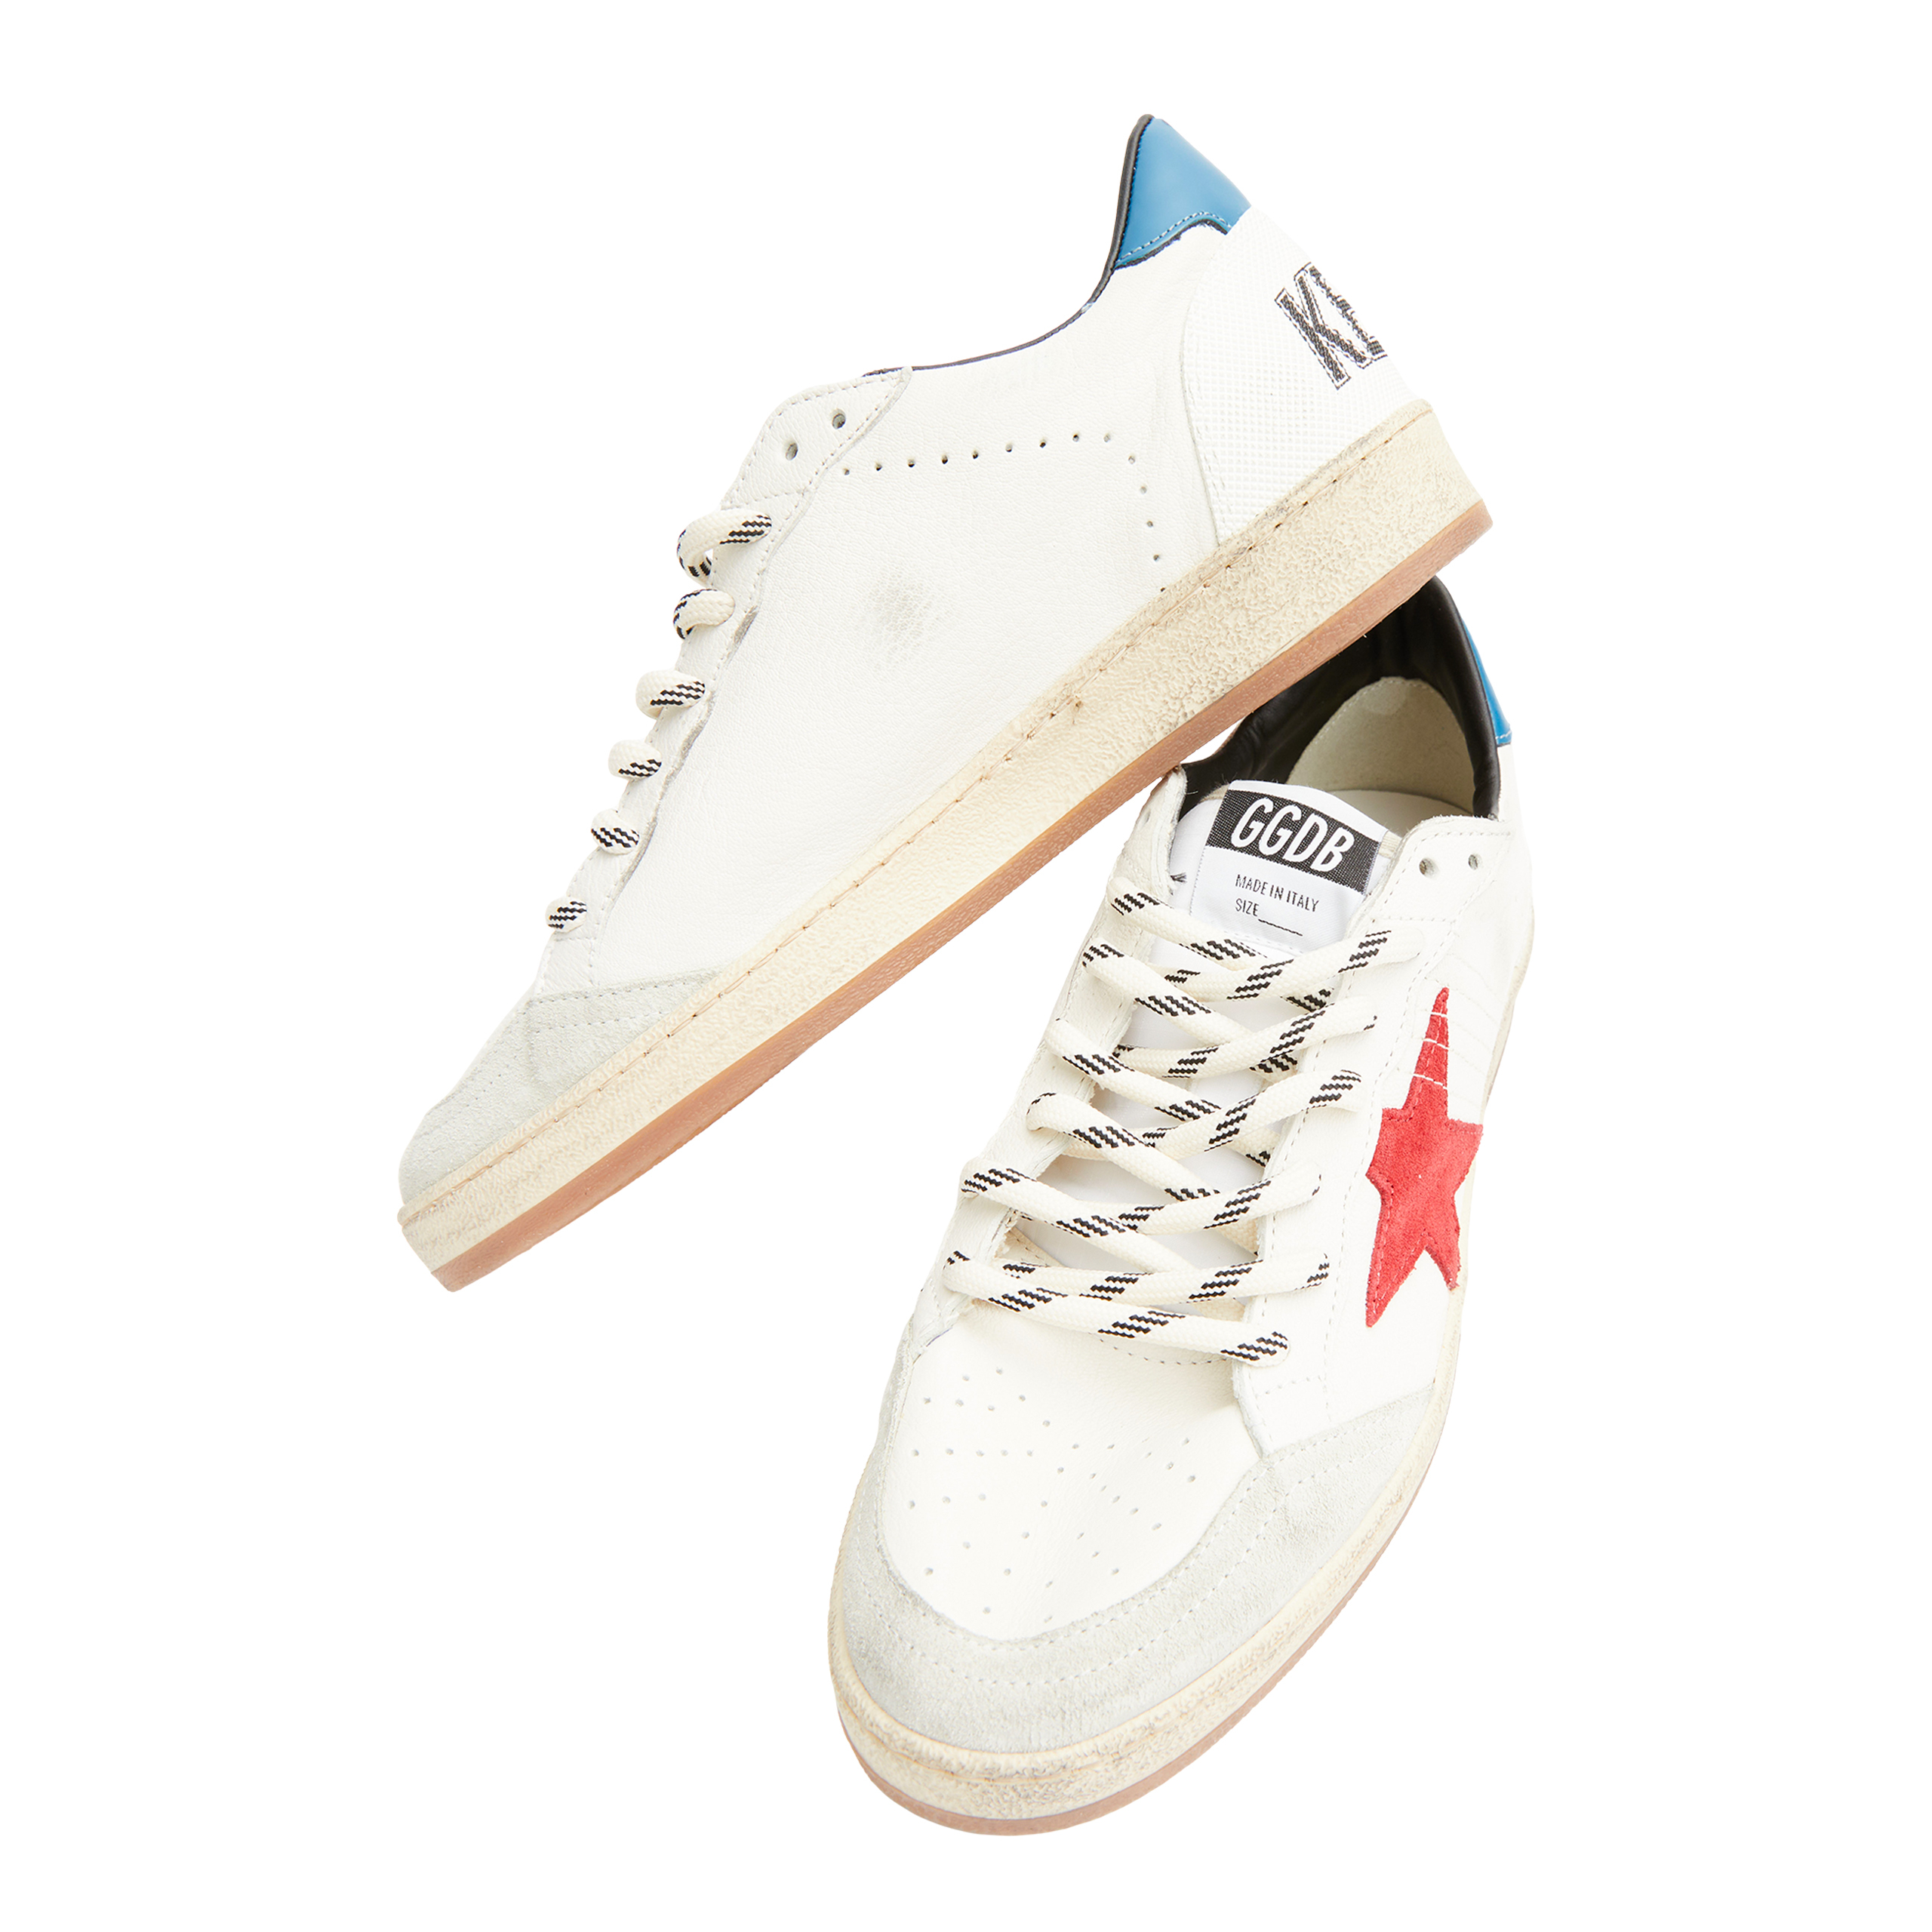 None Golden Goose Deluxe Brand GMF00117/F005403/11716, размер 39;40;41;42;43;44;45;46 GMF00117/F005403/11716 - фото 1